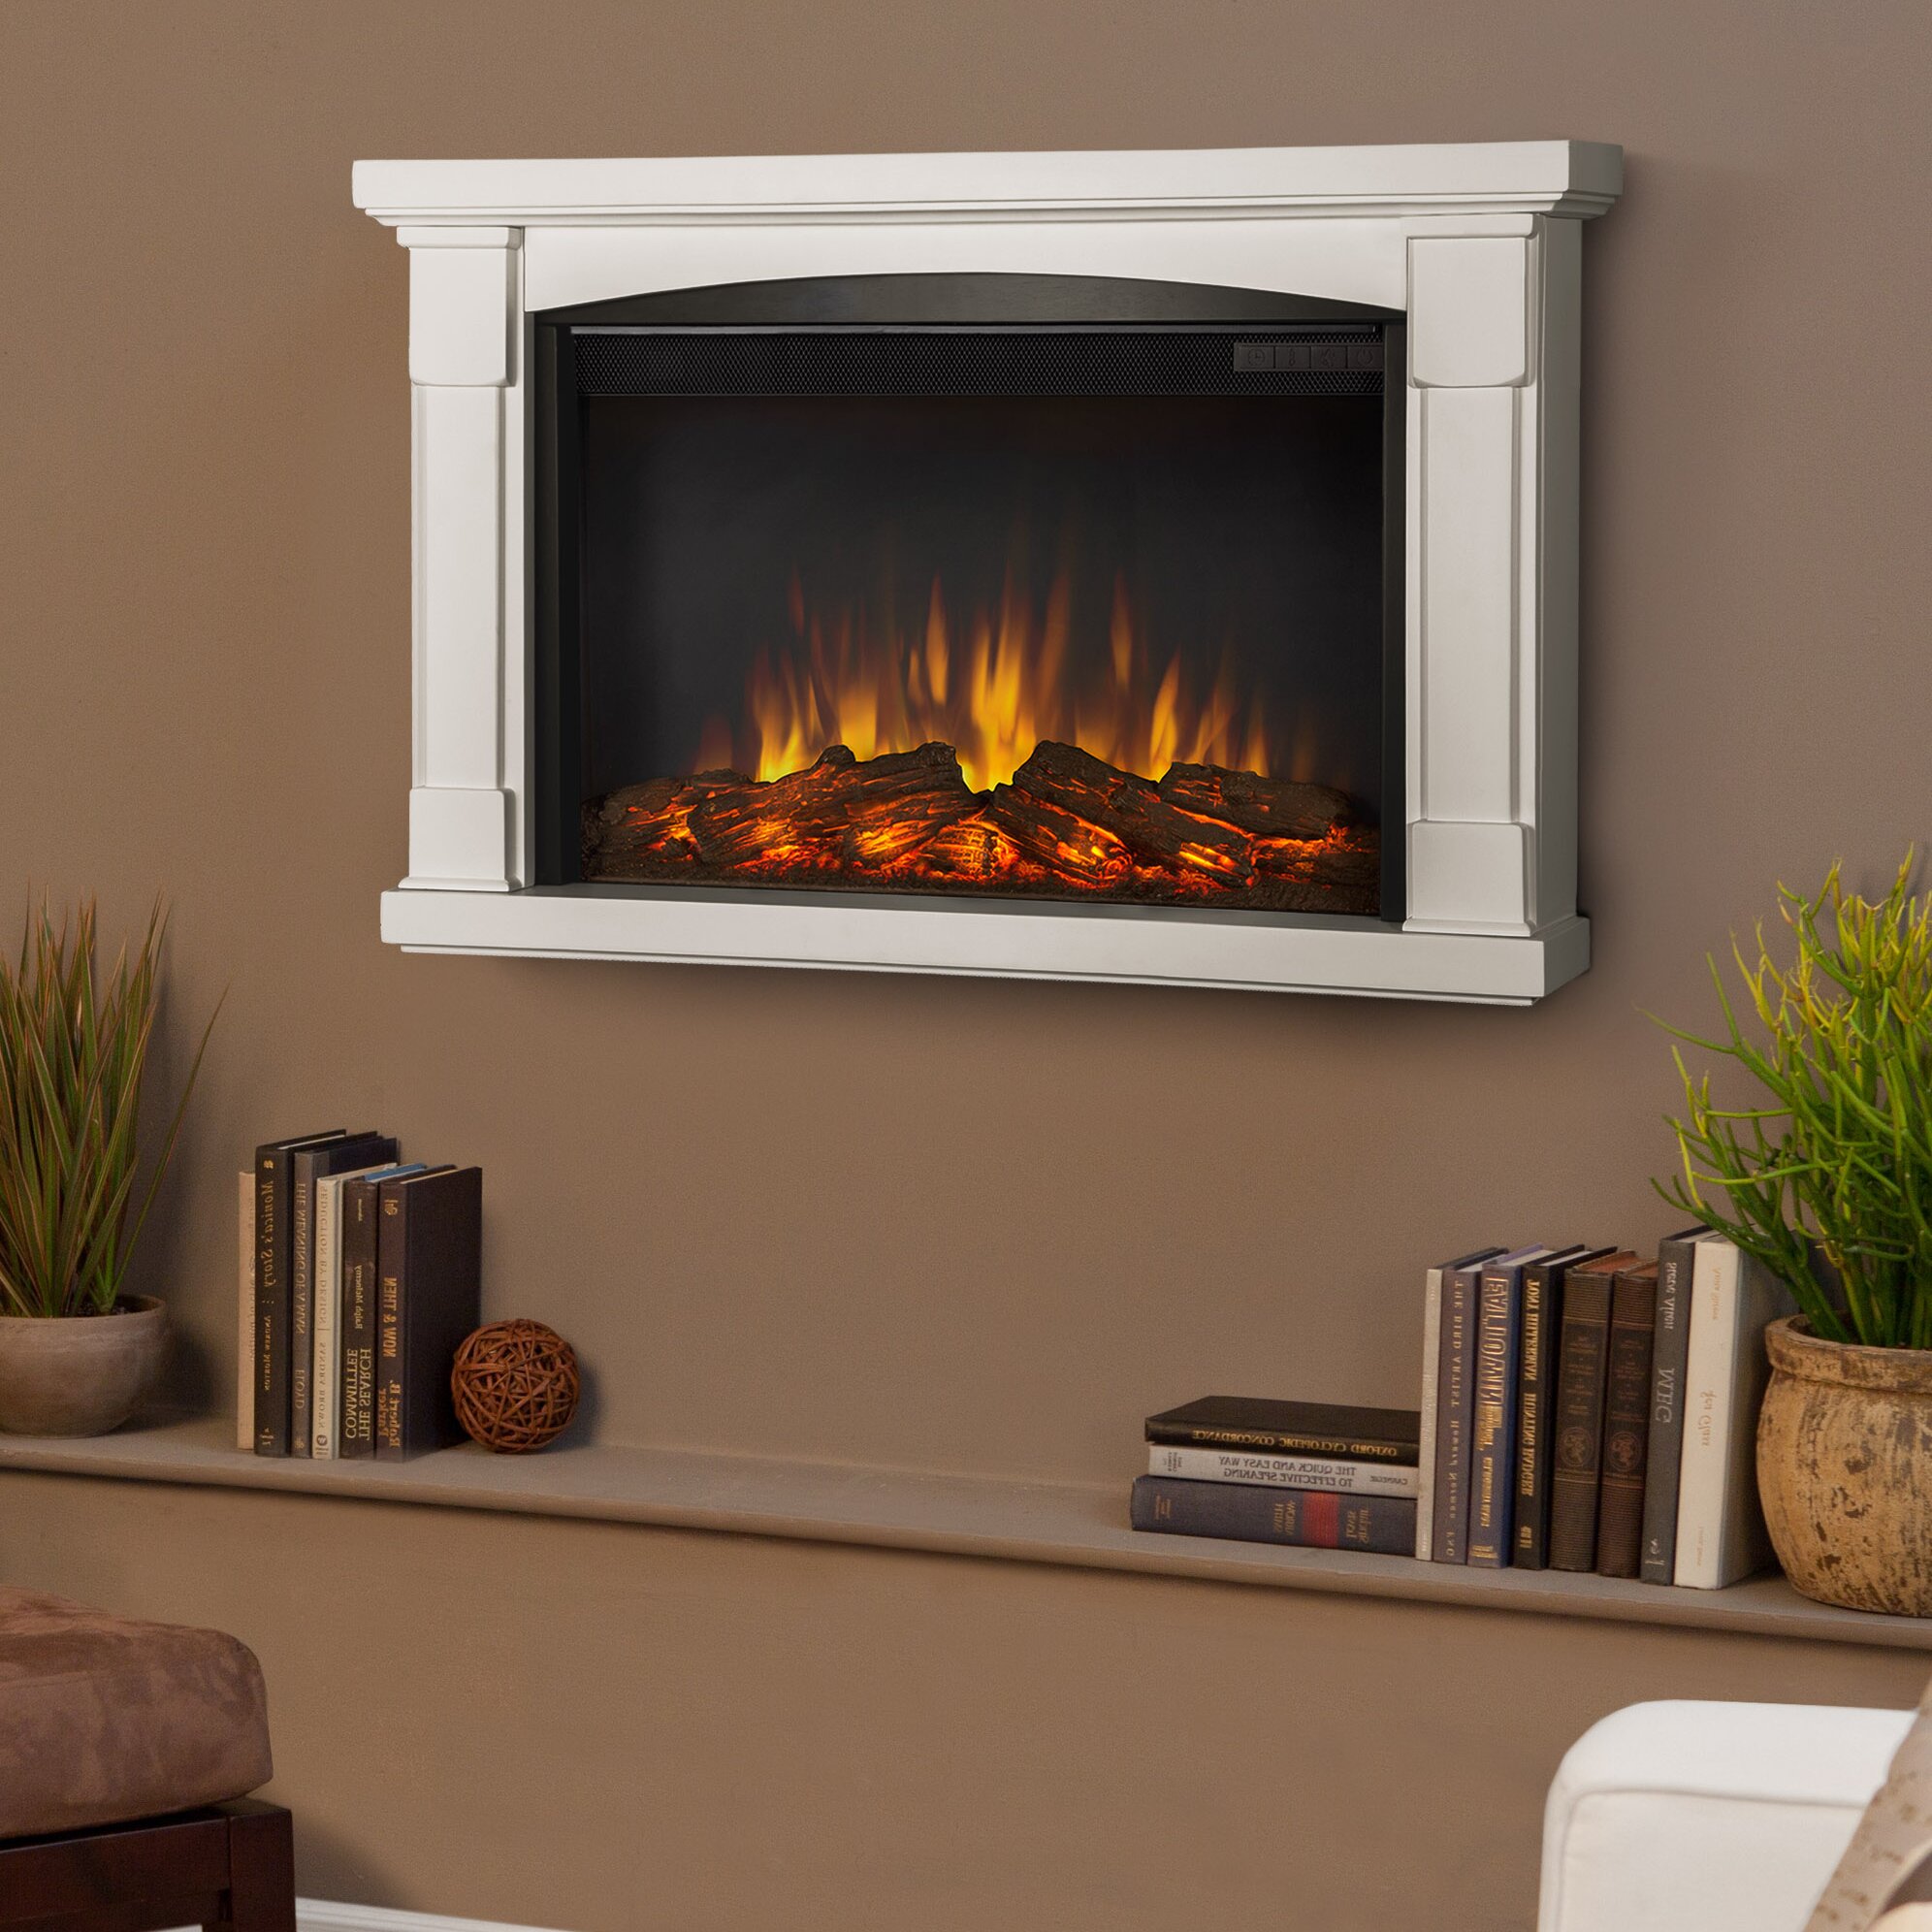 Real Flame Slim Brighton Wall Mounted Electric Fireplace & Reviews